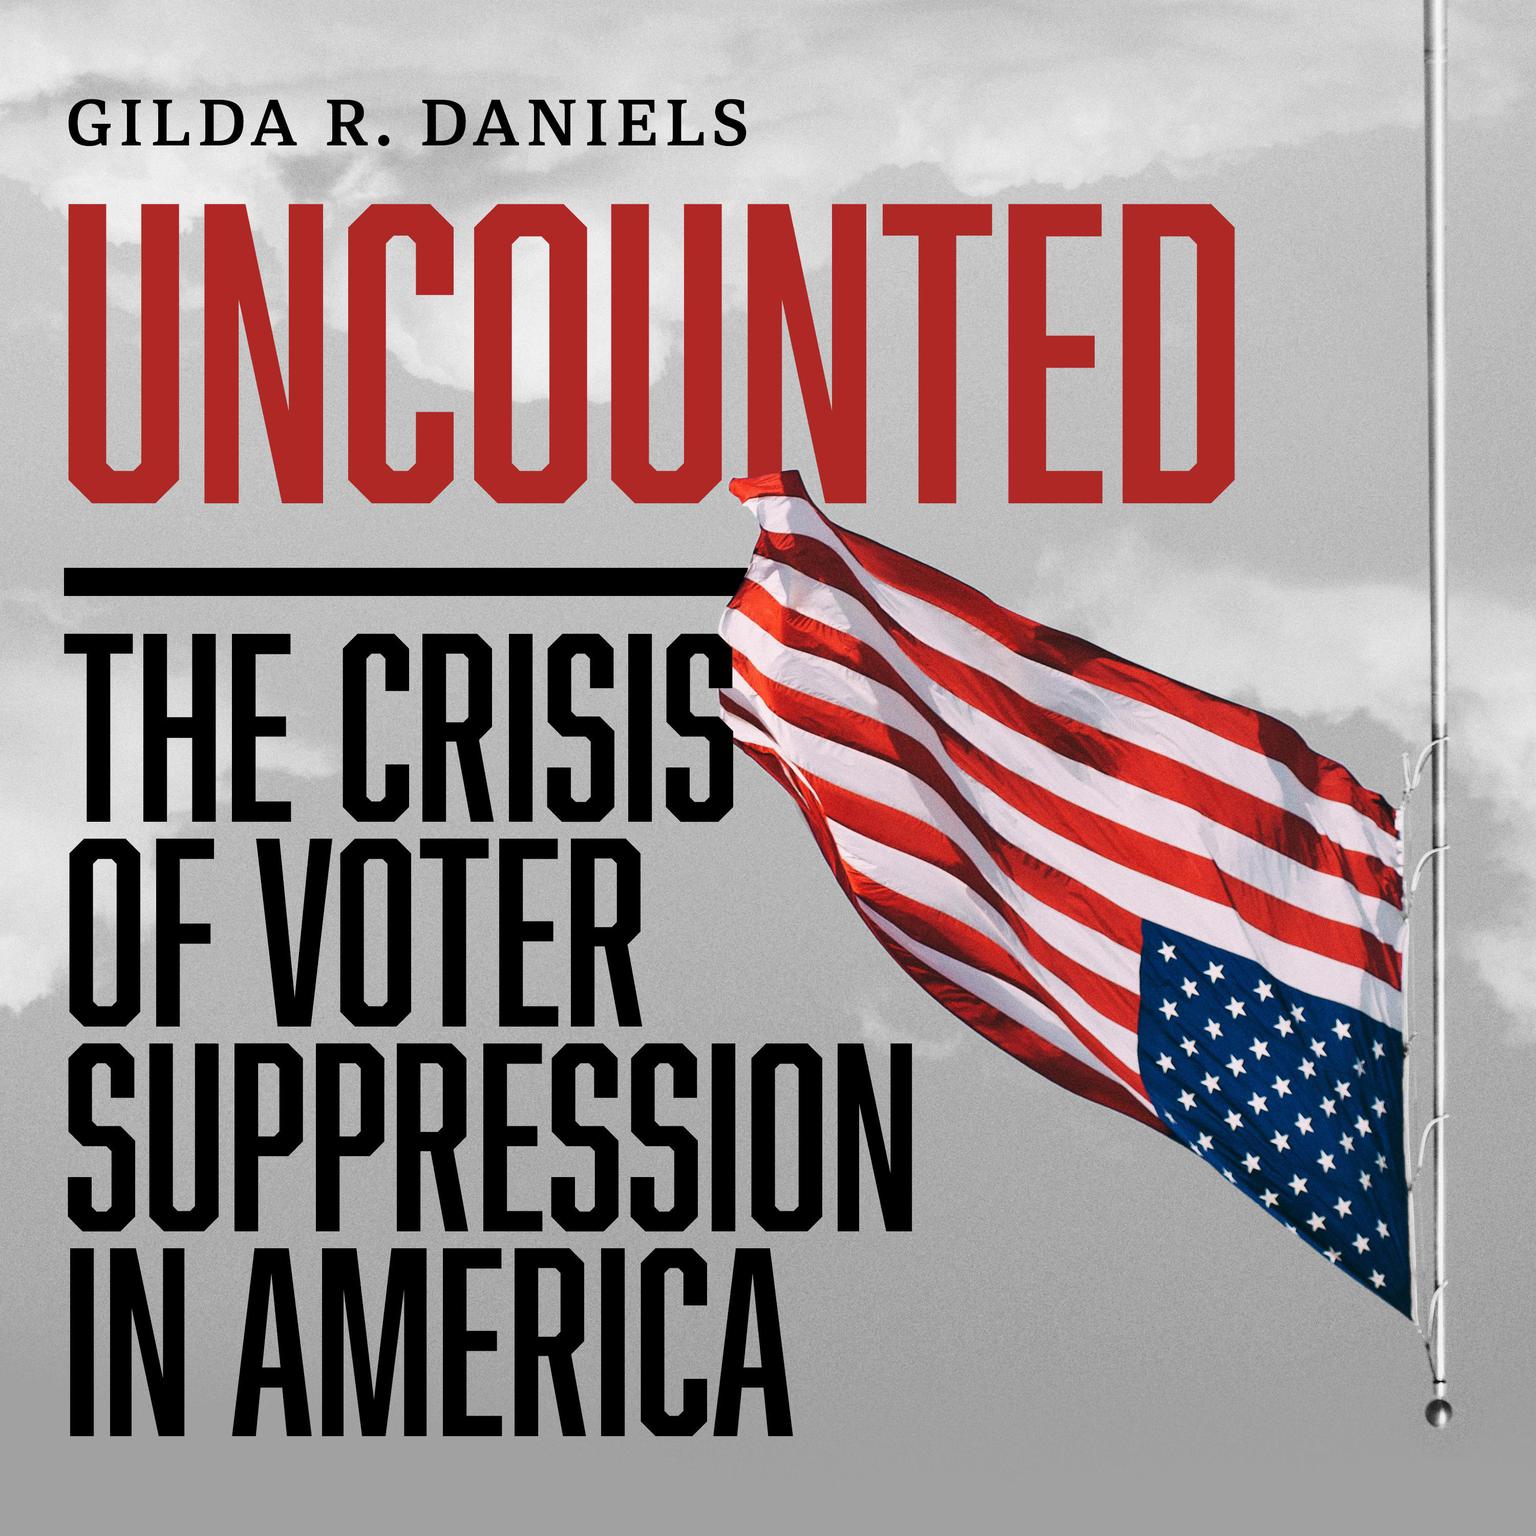 Uncounted: The Crisis of Voter Suppression in America Audiobook, by Gilda R. Daniels